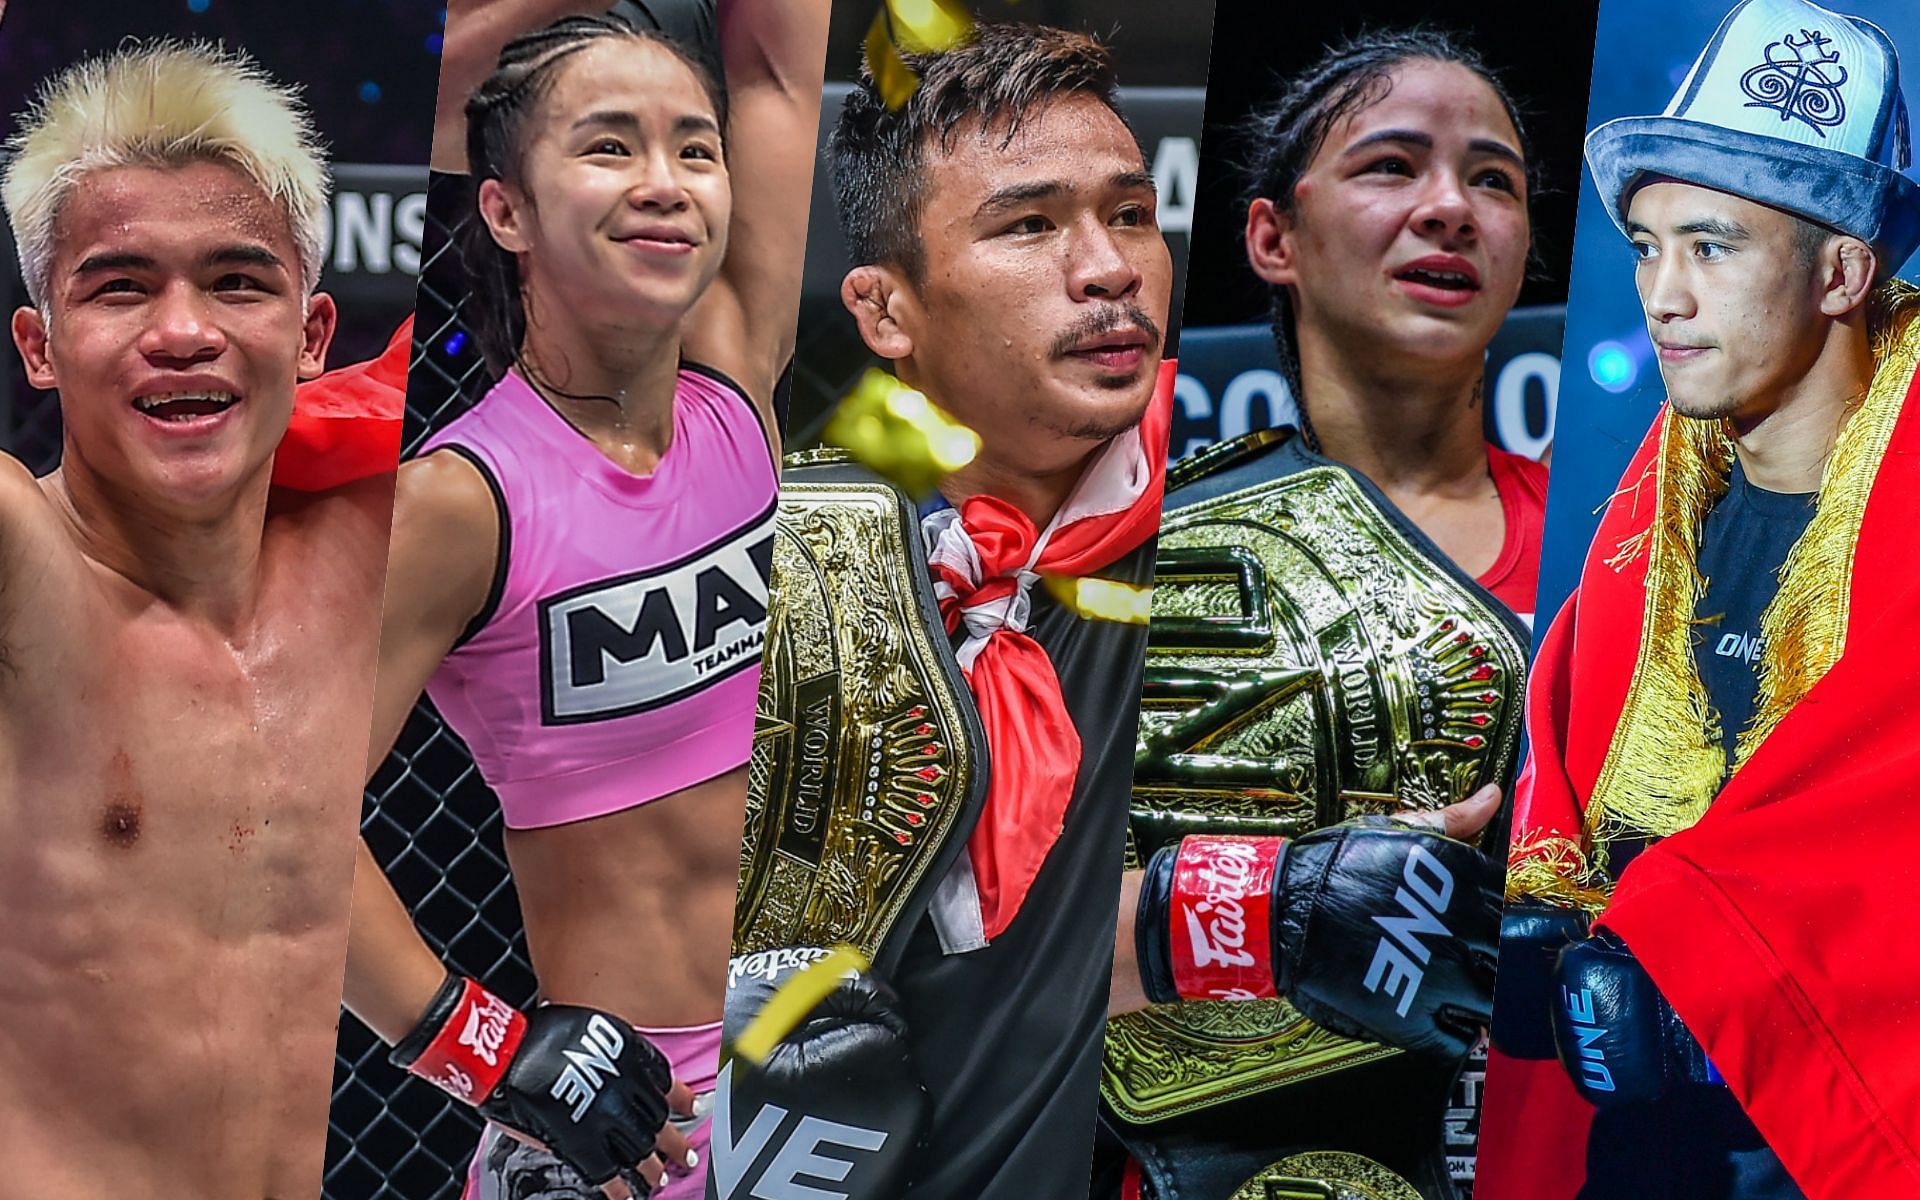 From left to right: Zhang Peimian, Ham Seo Hee, Superlek, Allycia Hellen Rodrigues, Akbar Abdullaev. | Photo by ONE Championship